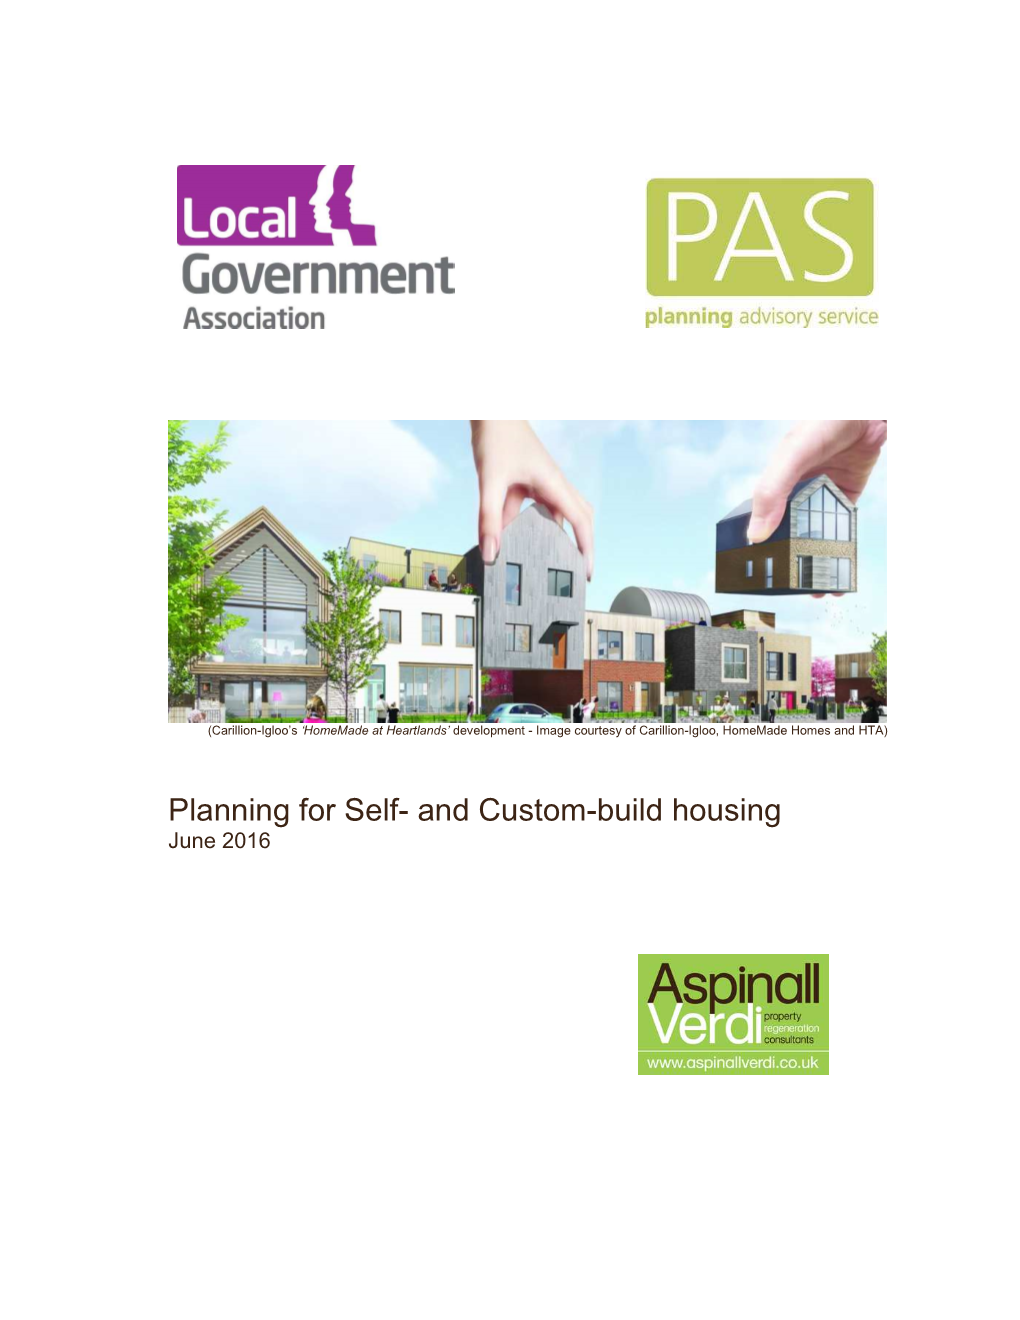 Planning for Self-Build and Custom Housebuilding Report Final 04